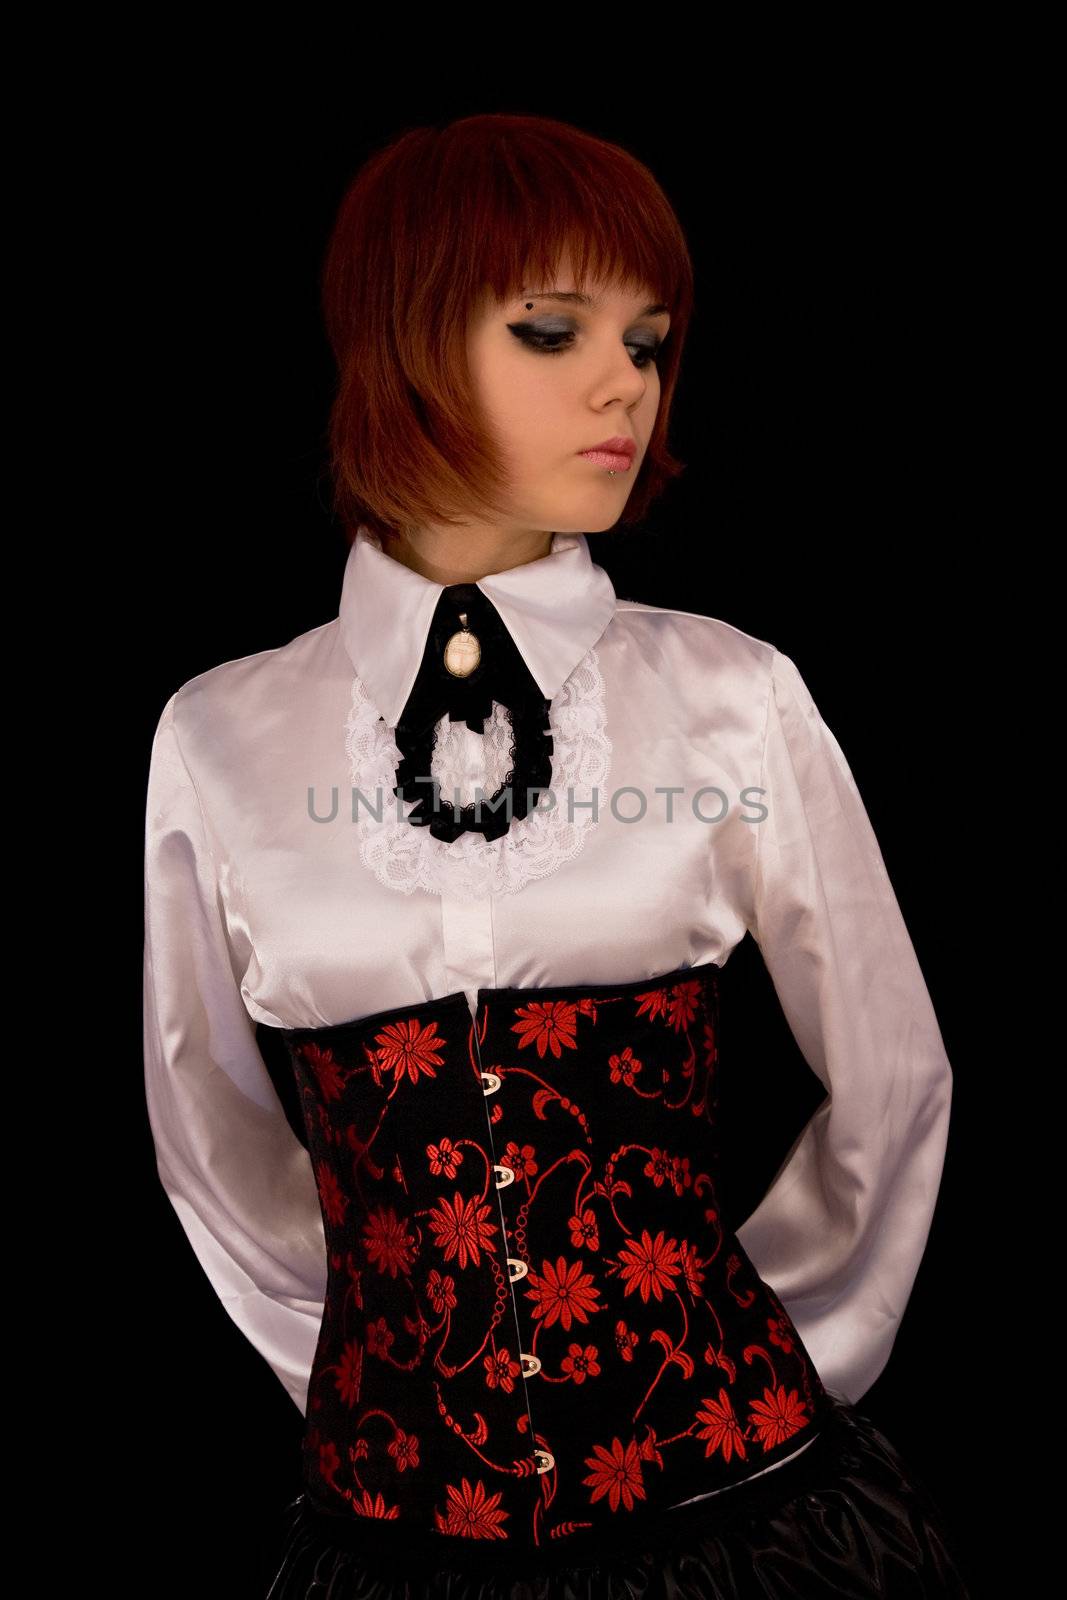 Romantic girl in white blouse and corset   by Elisanth